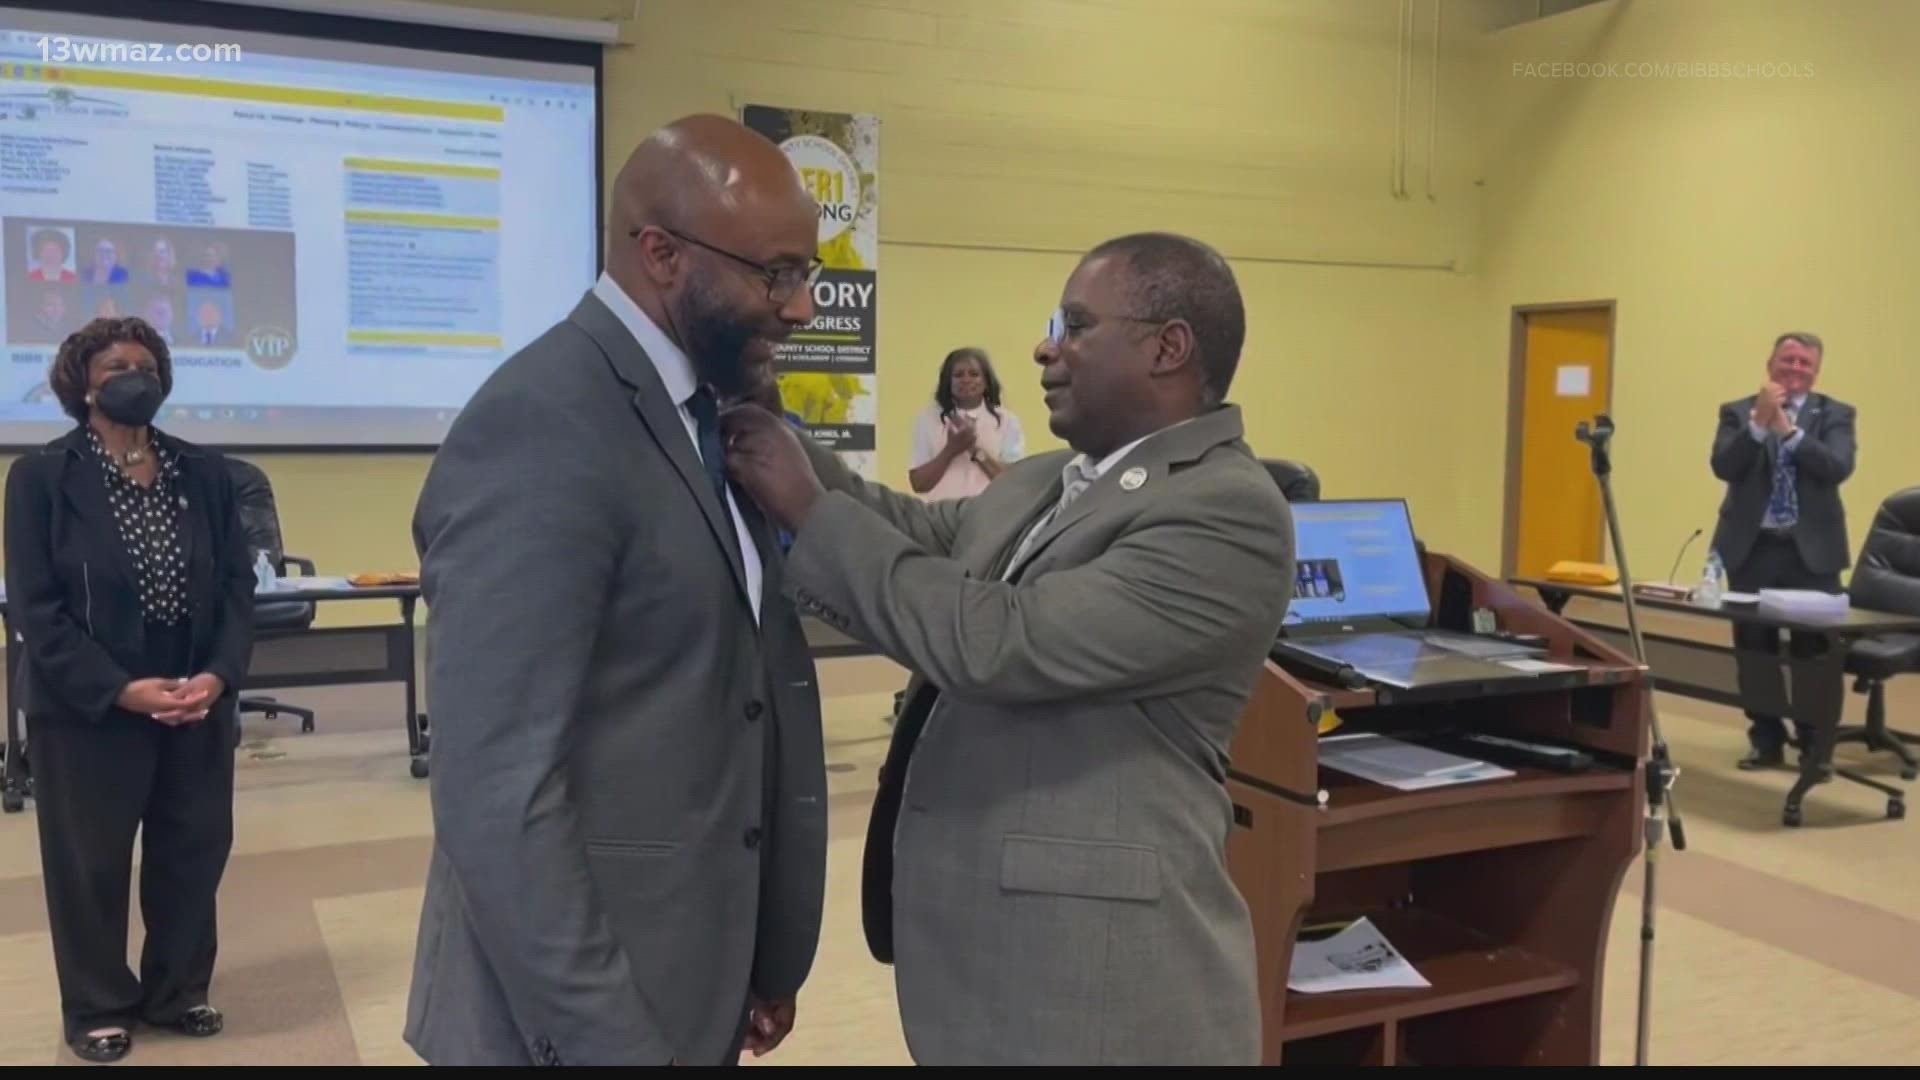 Sims received an official Bibb County BOE pin about a month ago the night he was named the district’s sole finalist for superintendent